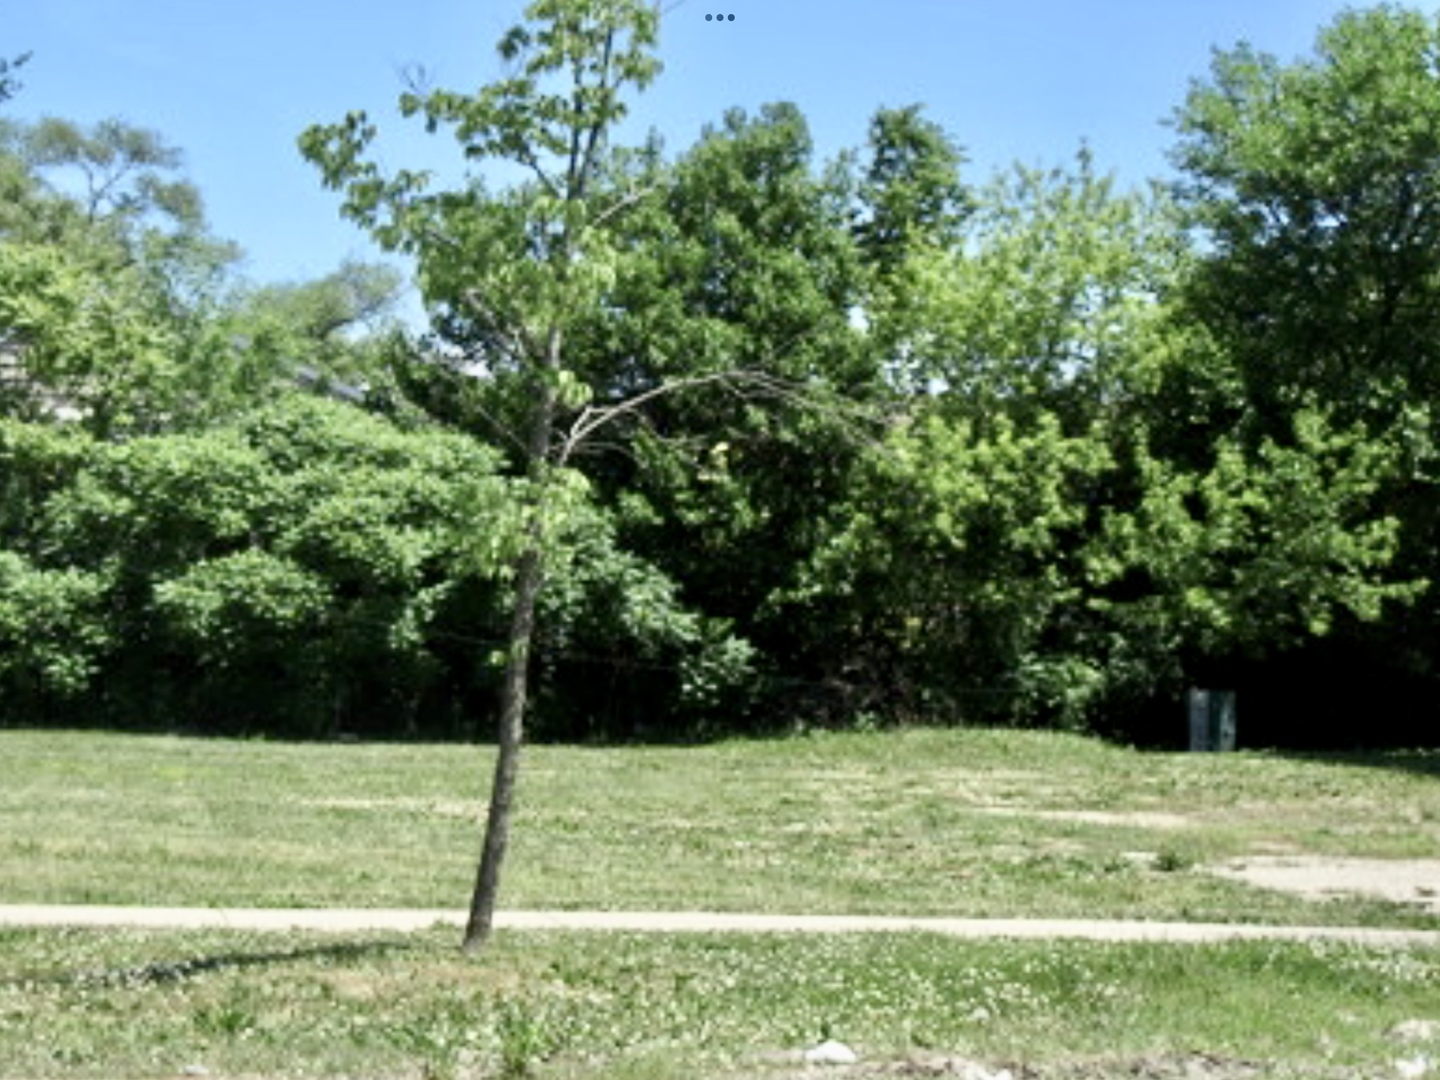 a view of a field with a tree